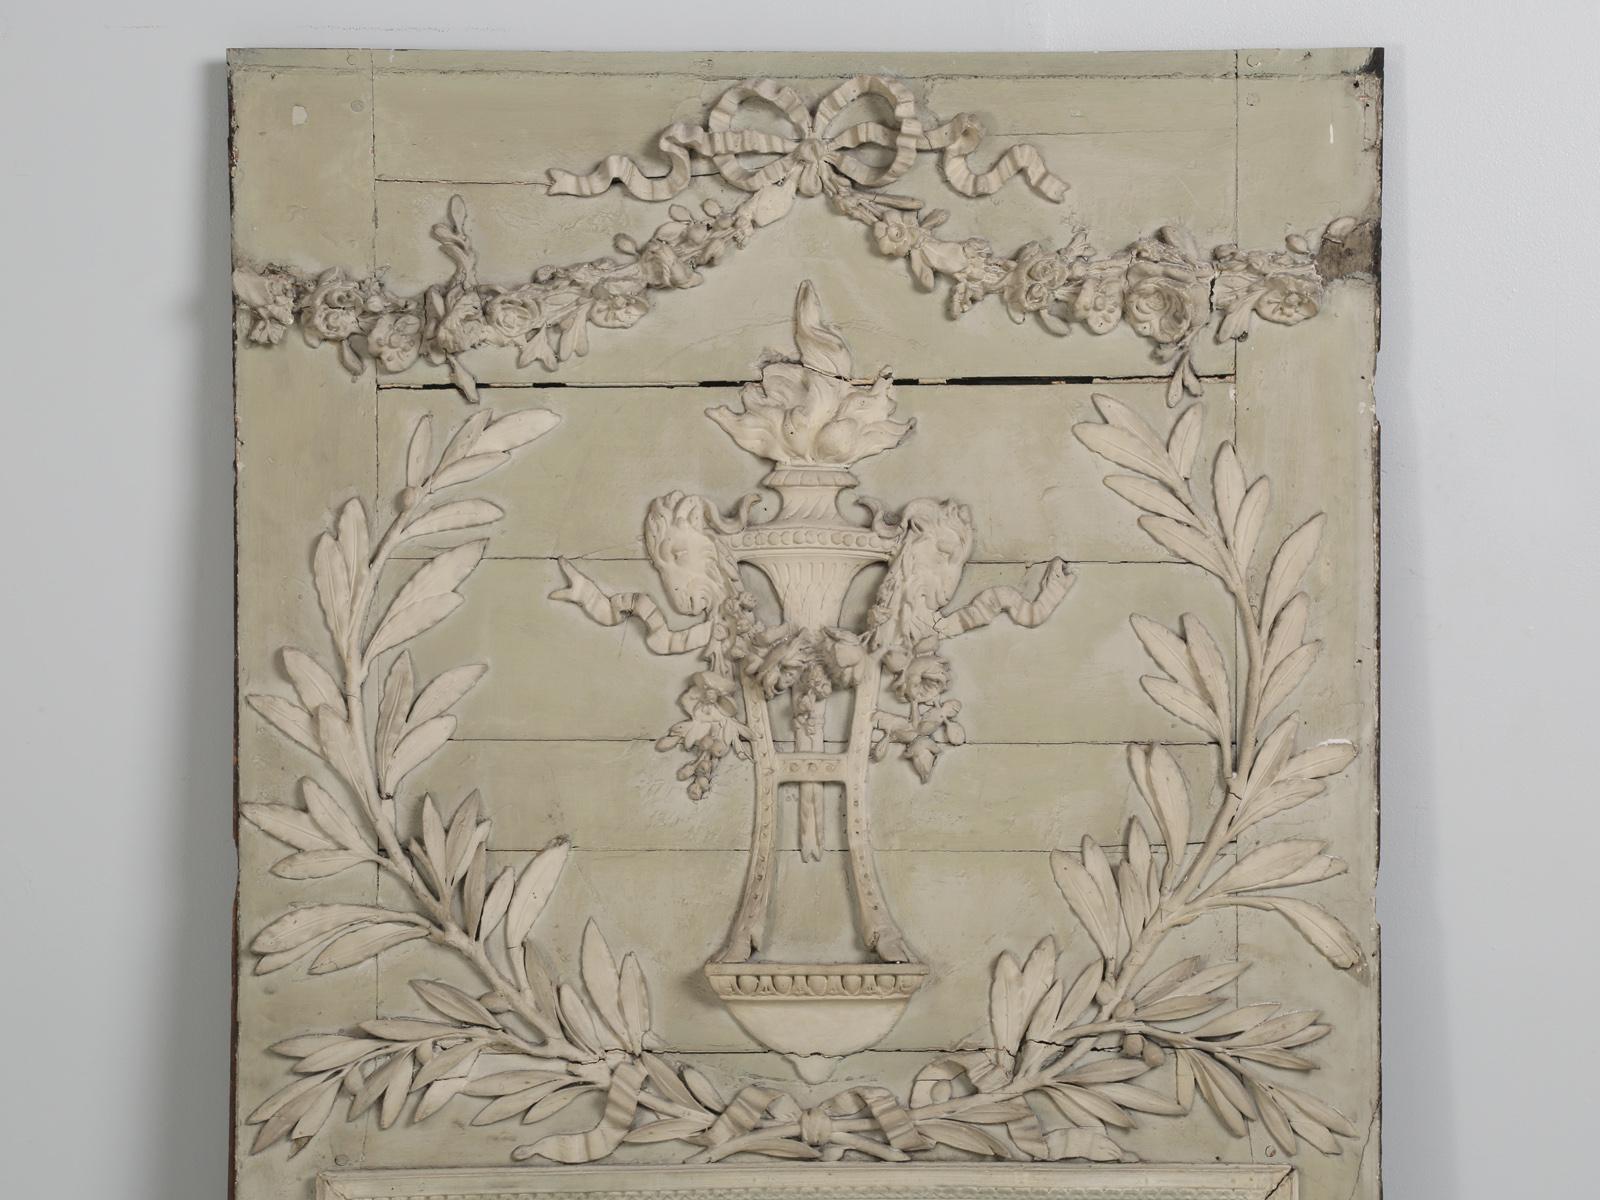 Antique French Mirror, in very Old Paint and probably made in the mid-1800's. Beautiful and intricate hand-carved relief, consisting of an urn flanked by pair of rams, floras, and leaves. Built into an early Parisian apartment. Painted in a soft and